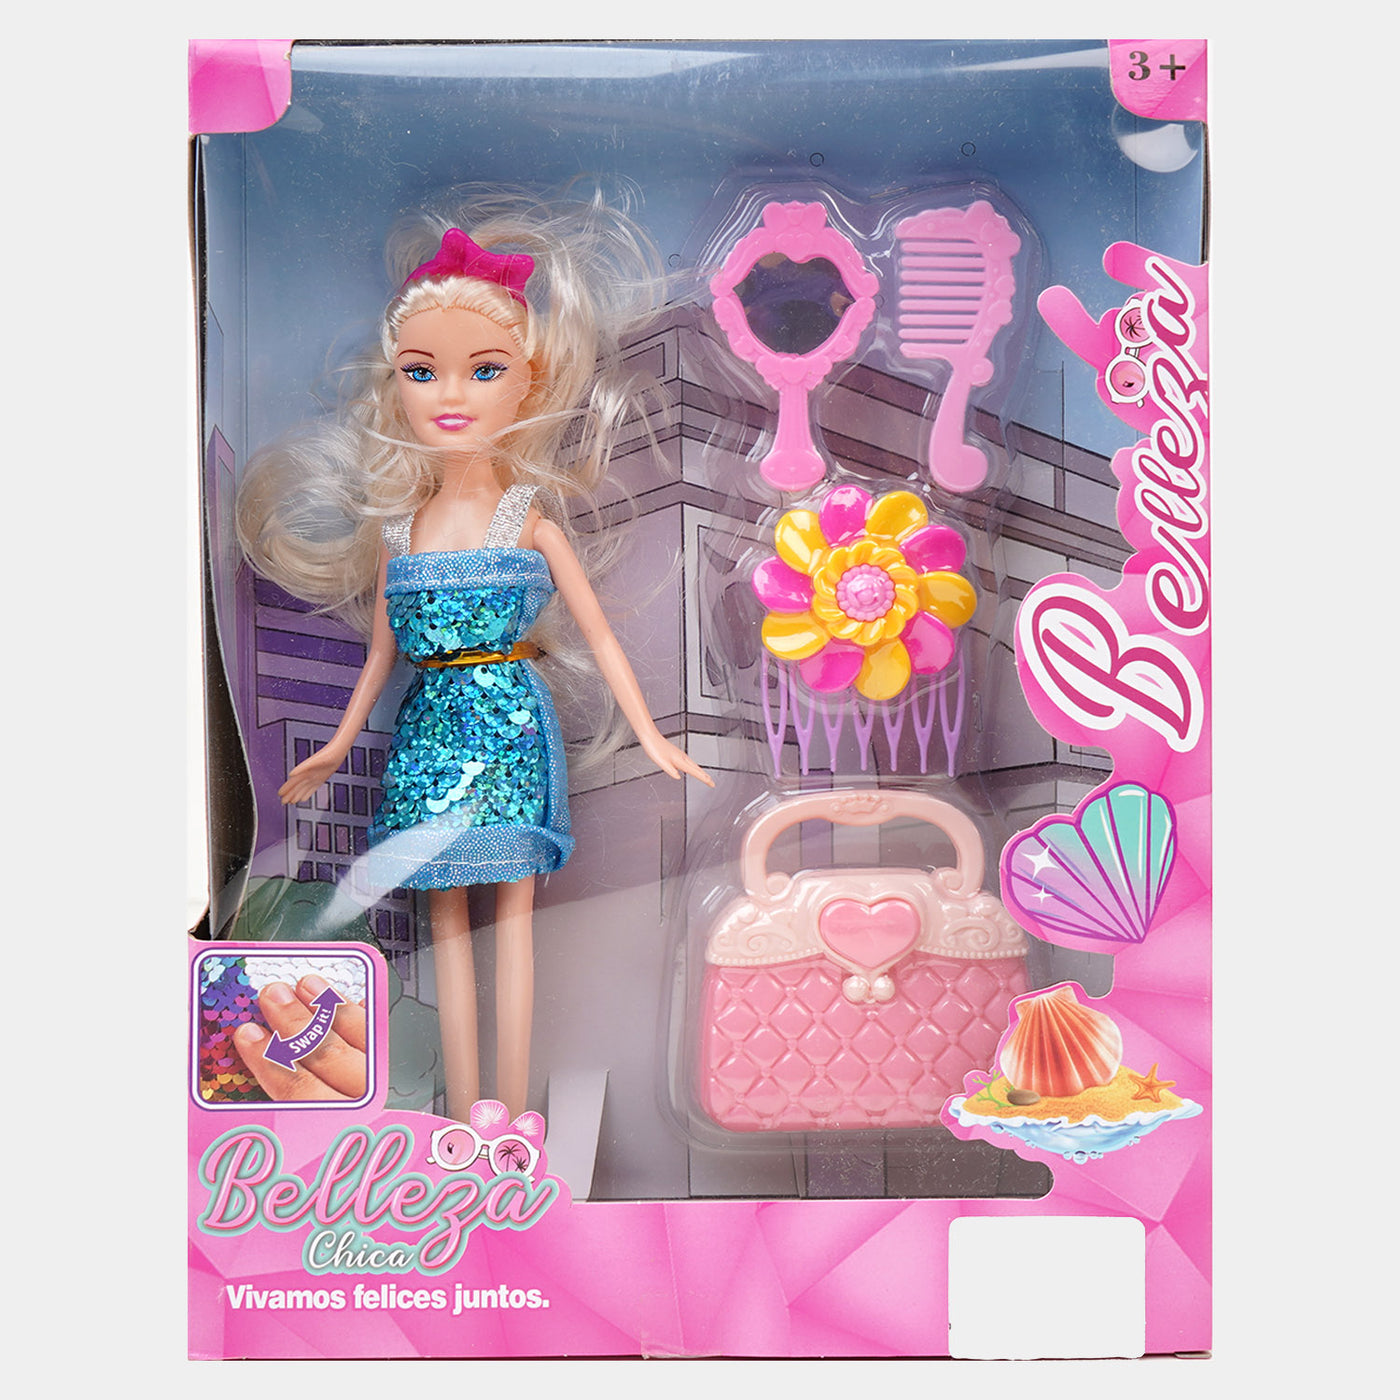 Cute Doll With Accessories For Girls